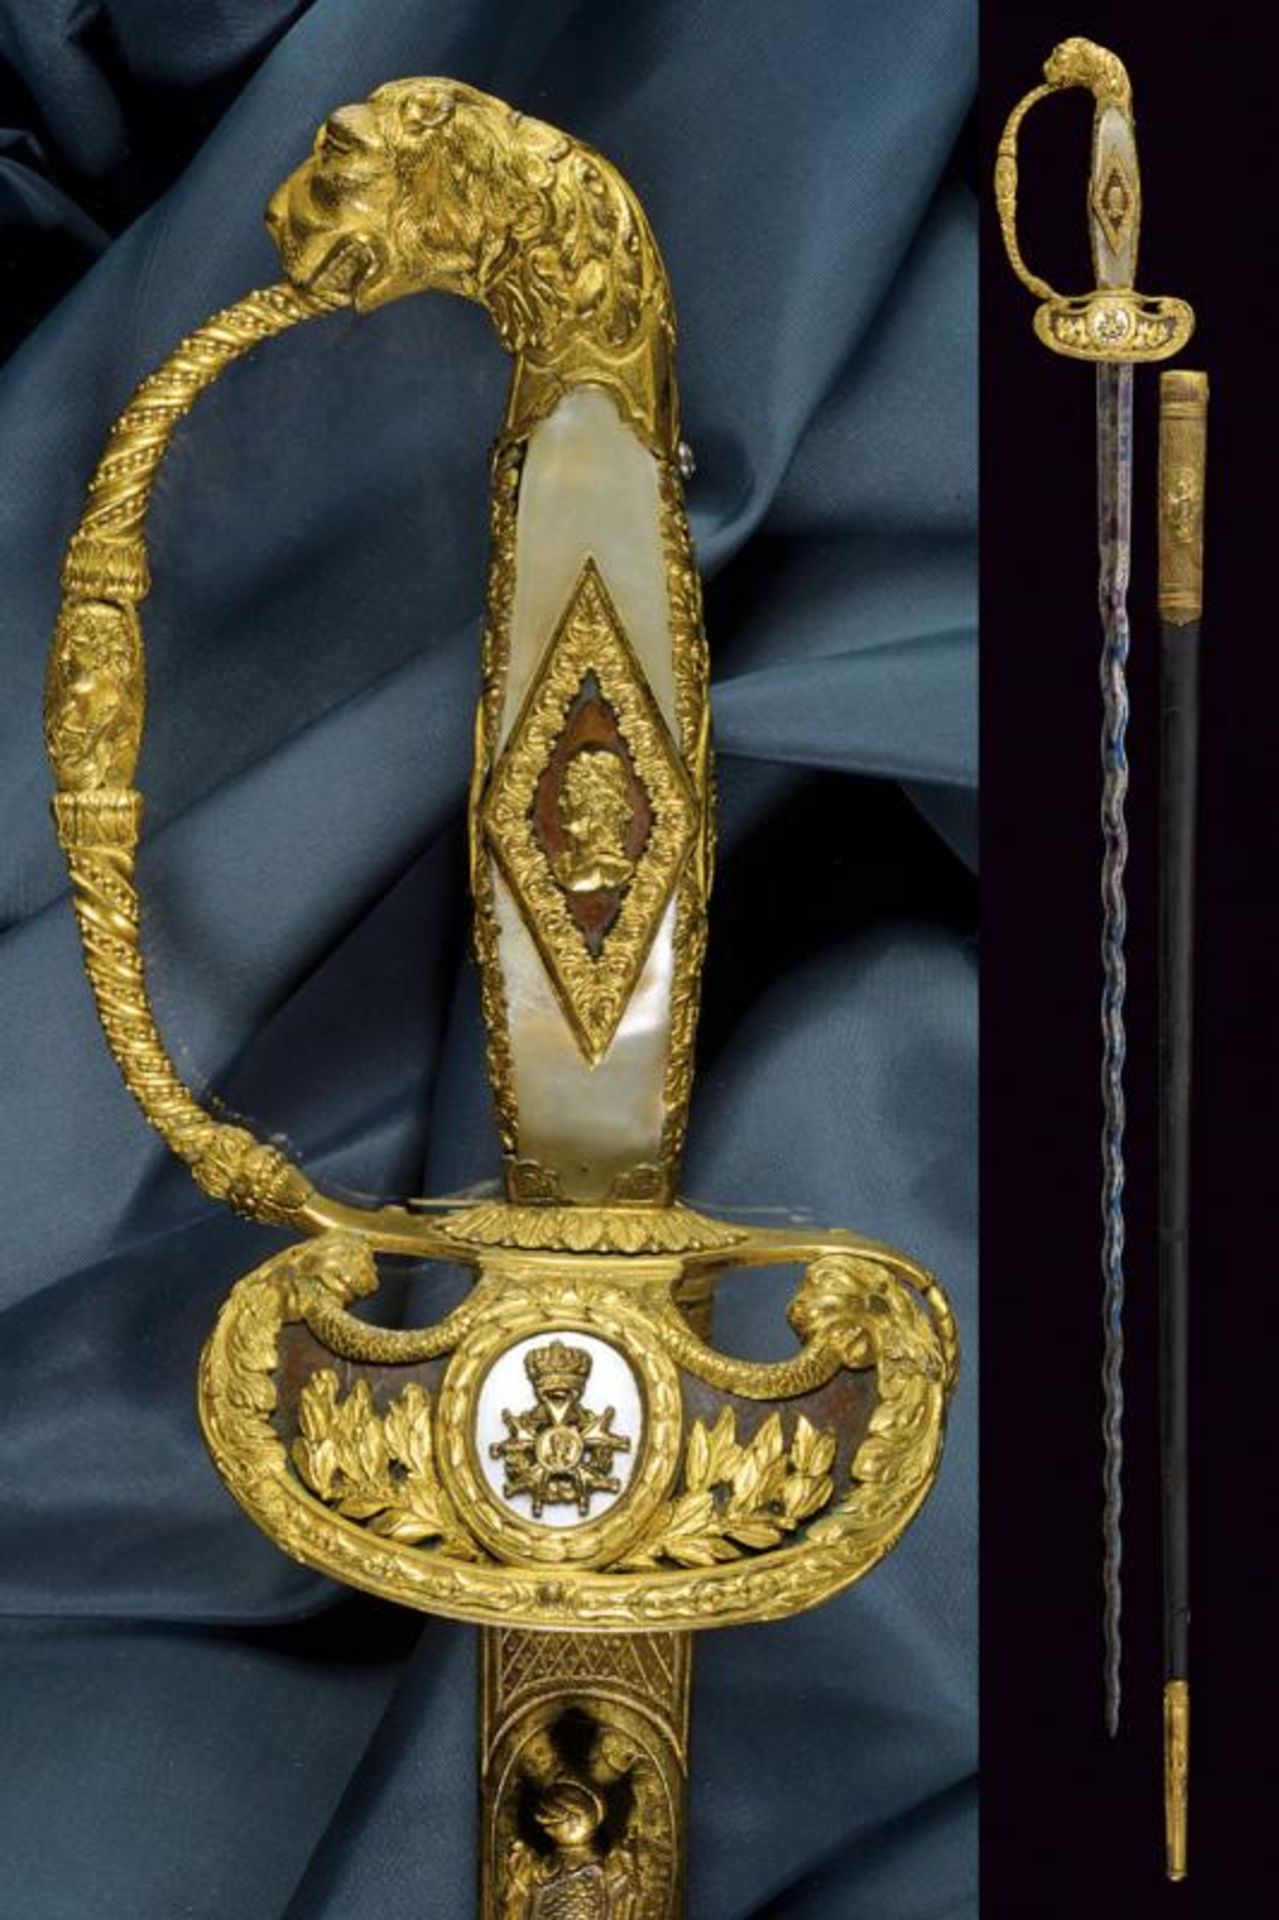 An important small sword of the Legion of Honour